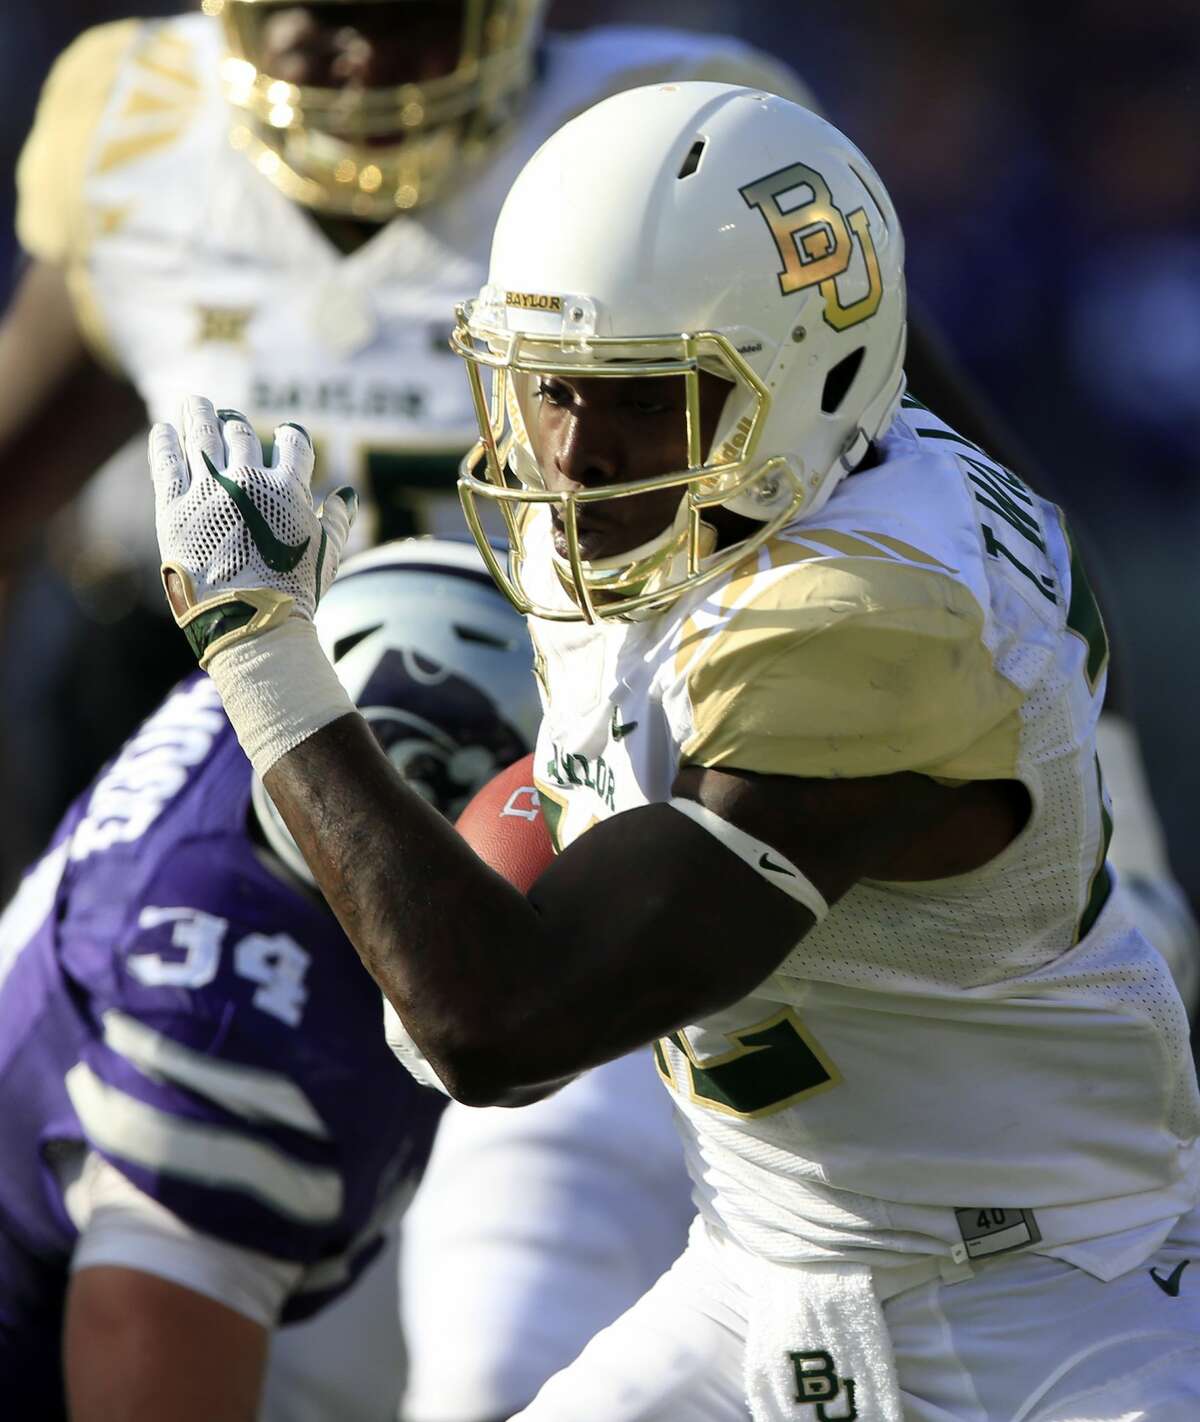 Baylor running back Terence Williams (22) gets past Kansas State defensive end Tanner Wood (34) during the second half of an NCAA college football game in Manhattan, Kan., Saturday, Sept. 30, 2017. Williams announced on Tuesday he will be transferring from Baylor to the University of Houston ad will be eligible to play immediately.(AP Photo/Orlin Wagner)